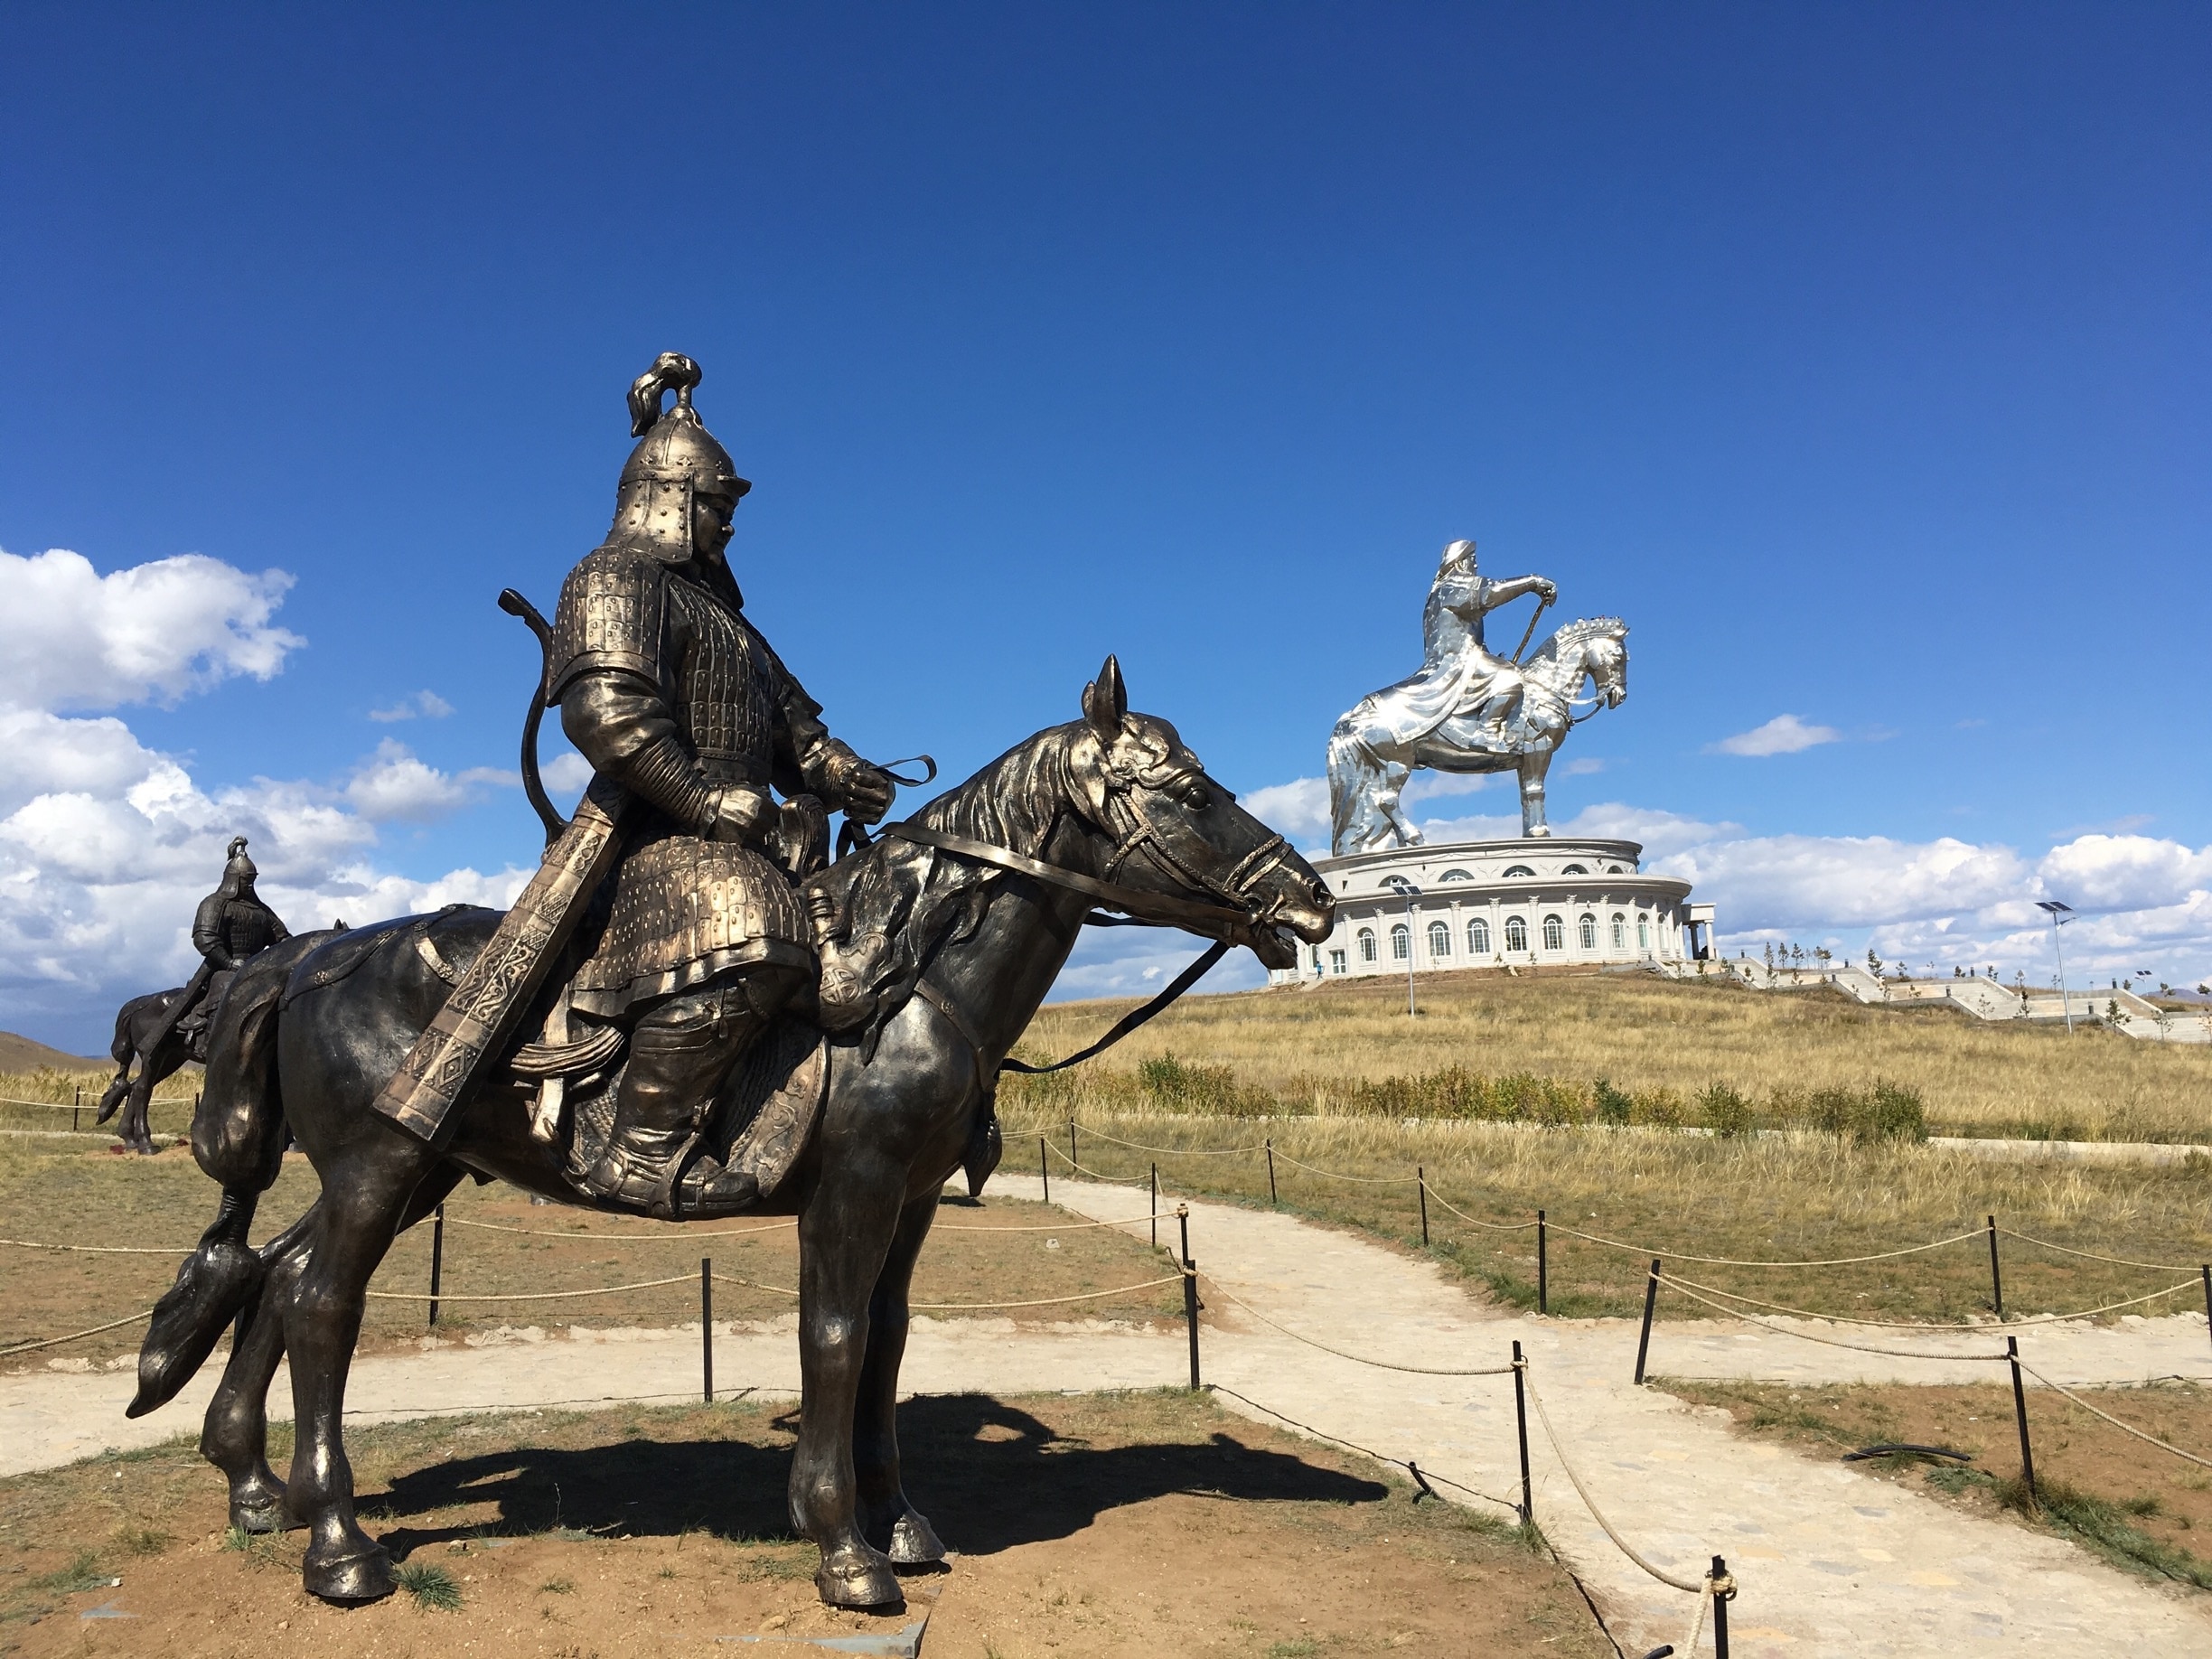 The huge stainless steel Chinggis statue looks tiny in the distance compared to one of his Mongol hordes. But it is actually a huge statue containing museum exhibits and restaurants. You can take a lift inside Chinggis then walk out over his horse’s head. 